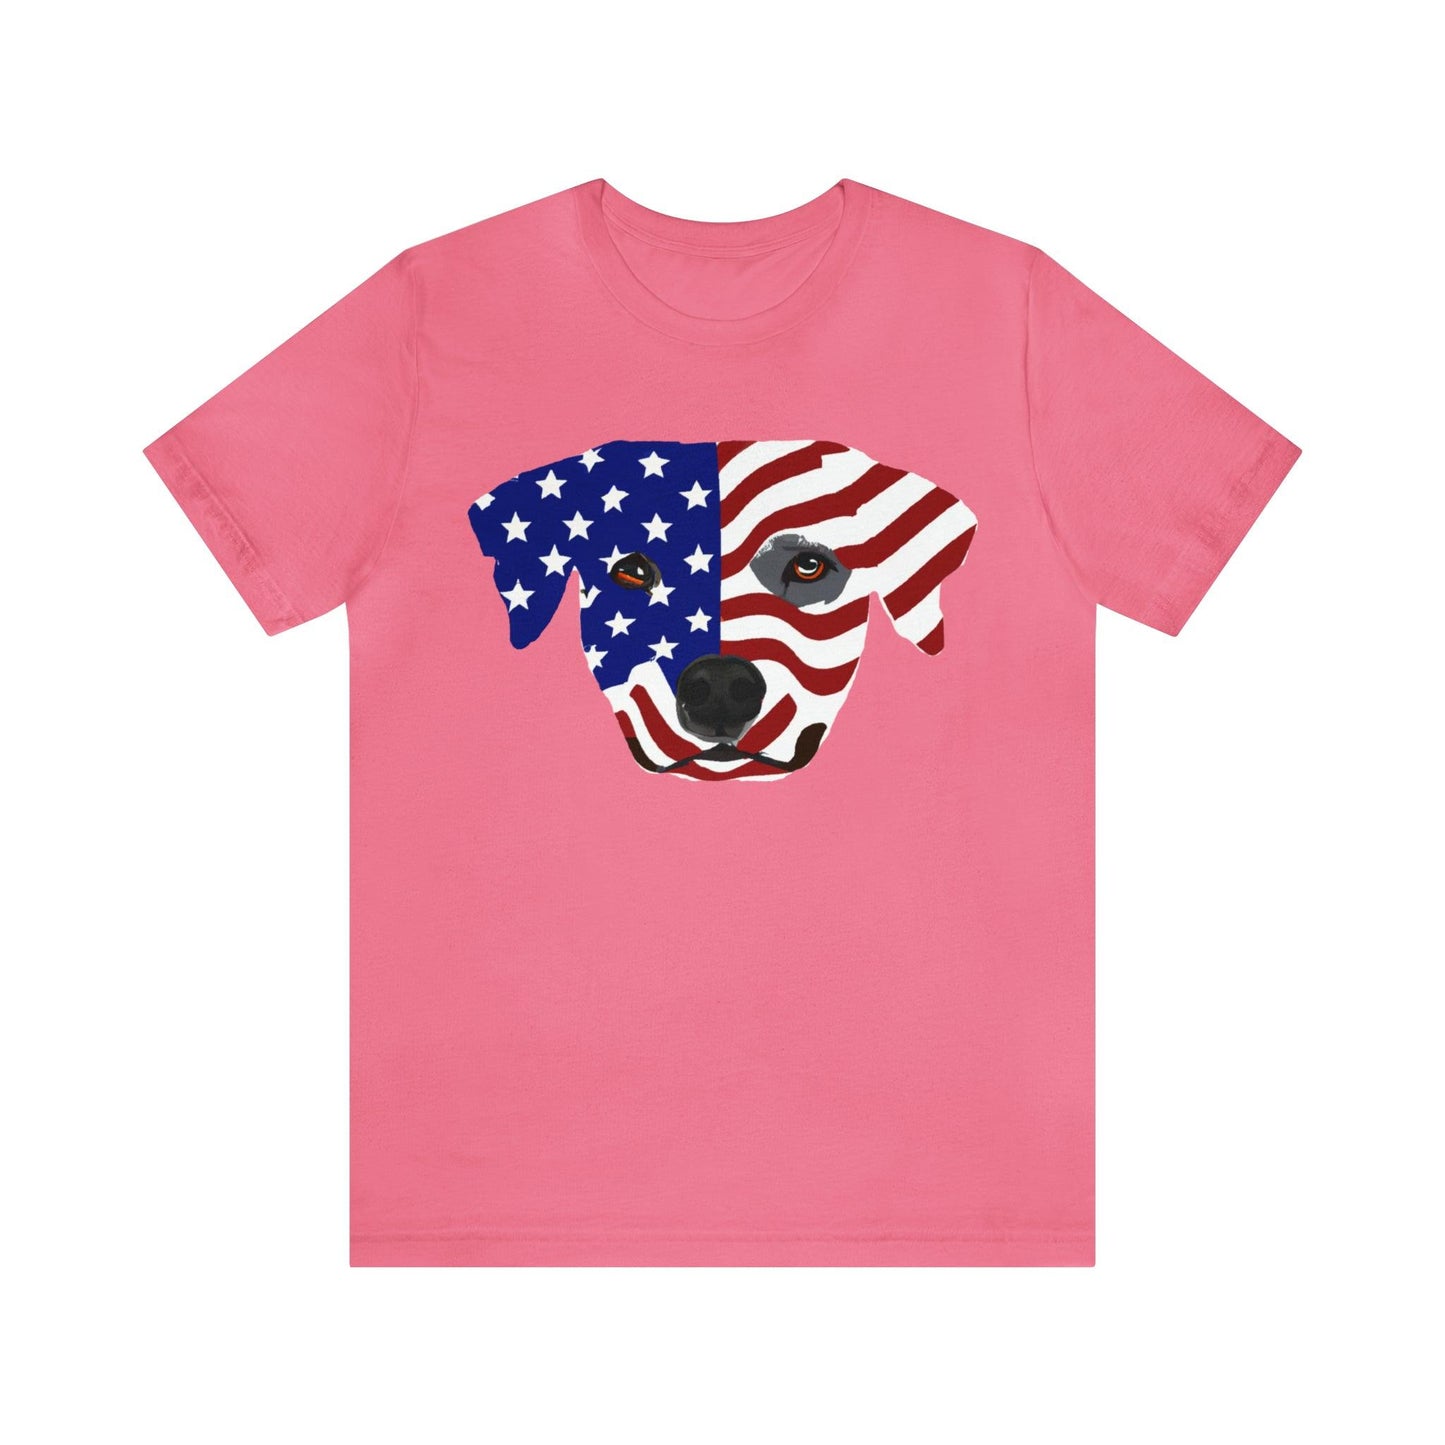 Express Your Patriotism and Love of Dogs with Dog Flag shirt: Independence Day, Fireworks, Freedom - Perfect for Women and Men